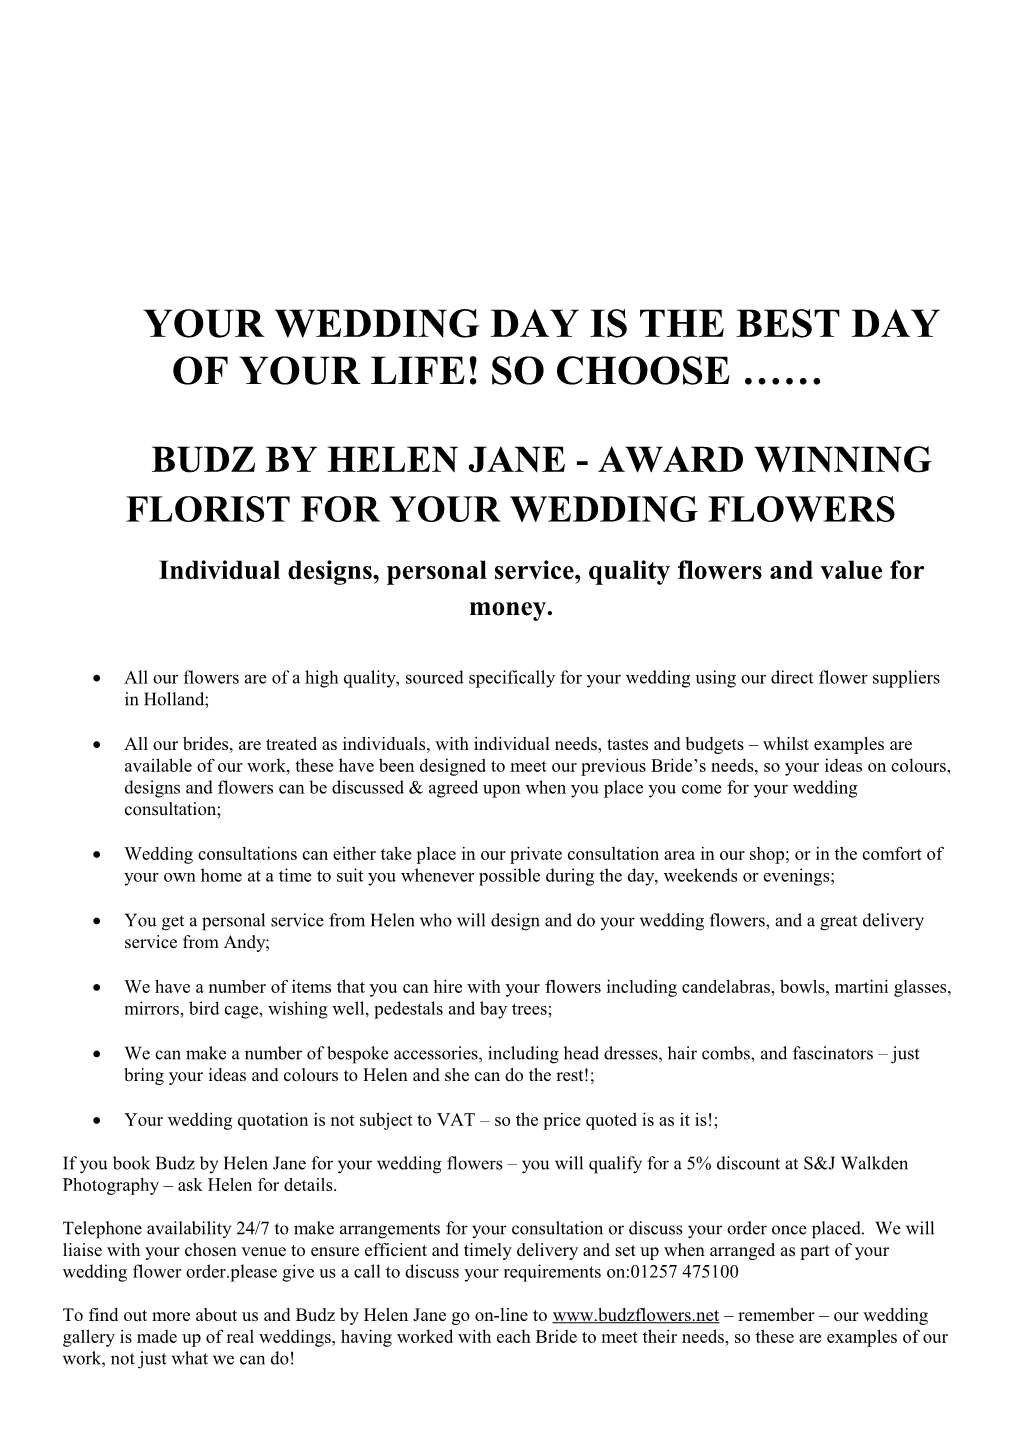 Your Wedding Day Is the Best Day of Your Life! So Choose